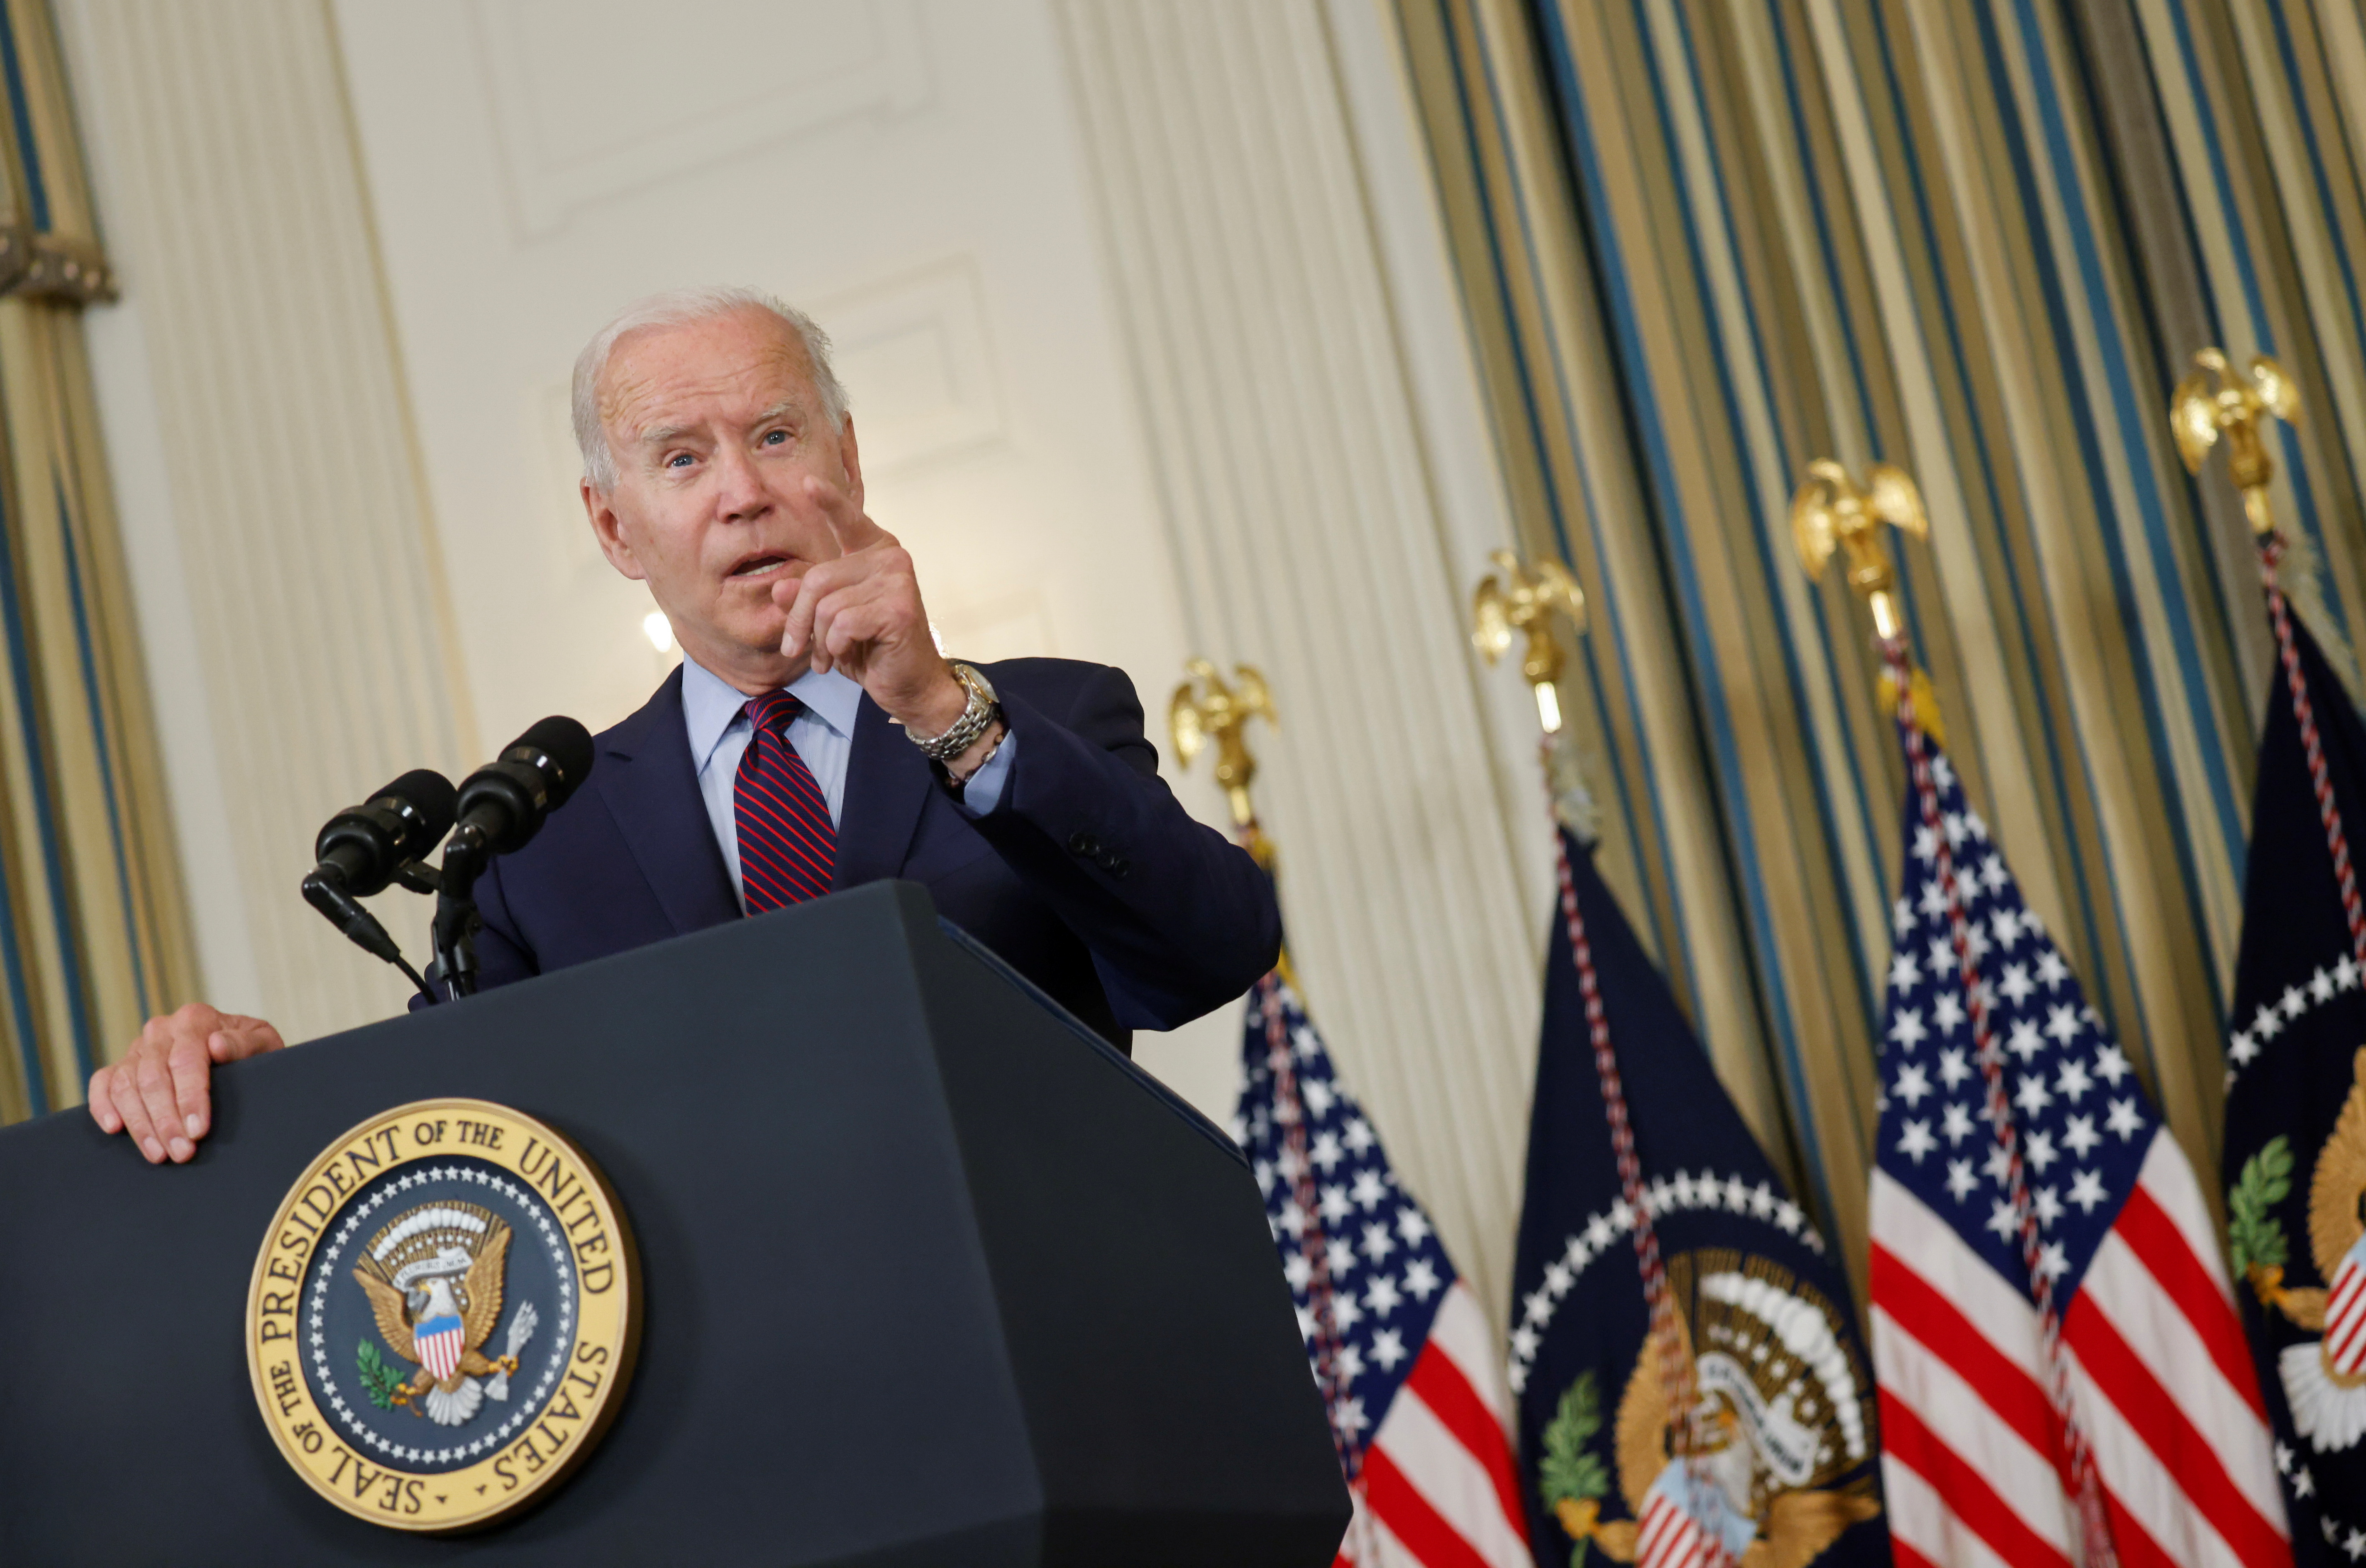 U.S. President Joe Biden delivers remarks on the U.S. debt ceiling from the State Dining Room of the White House